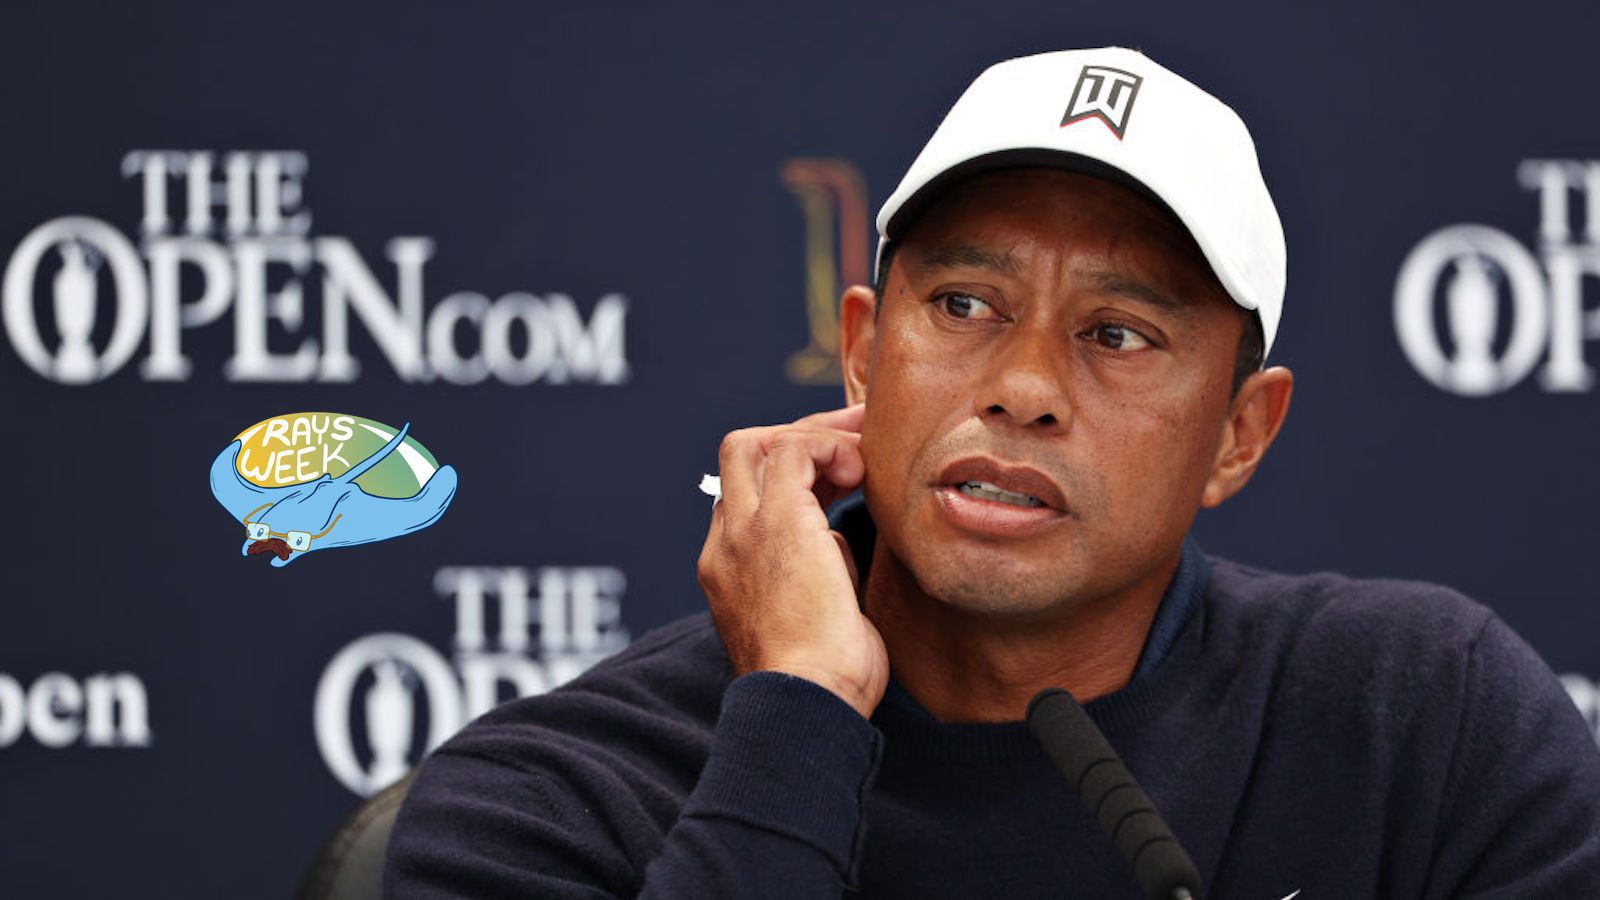 Tiger woods at a press conference